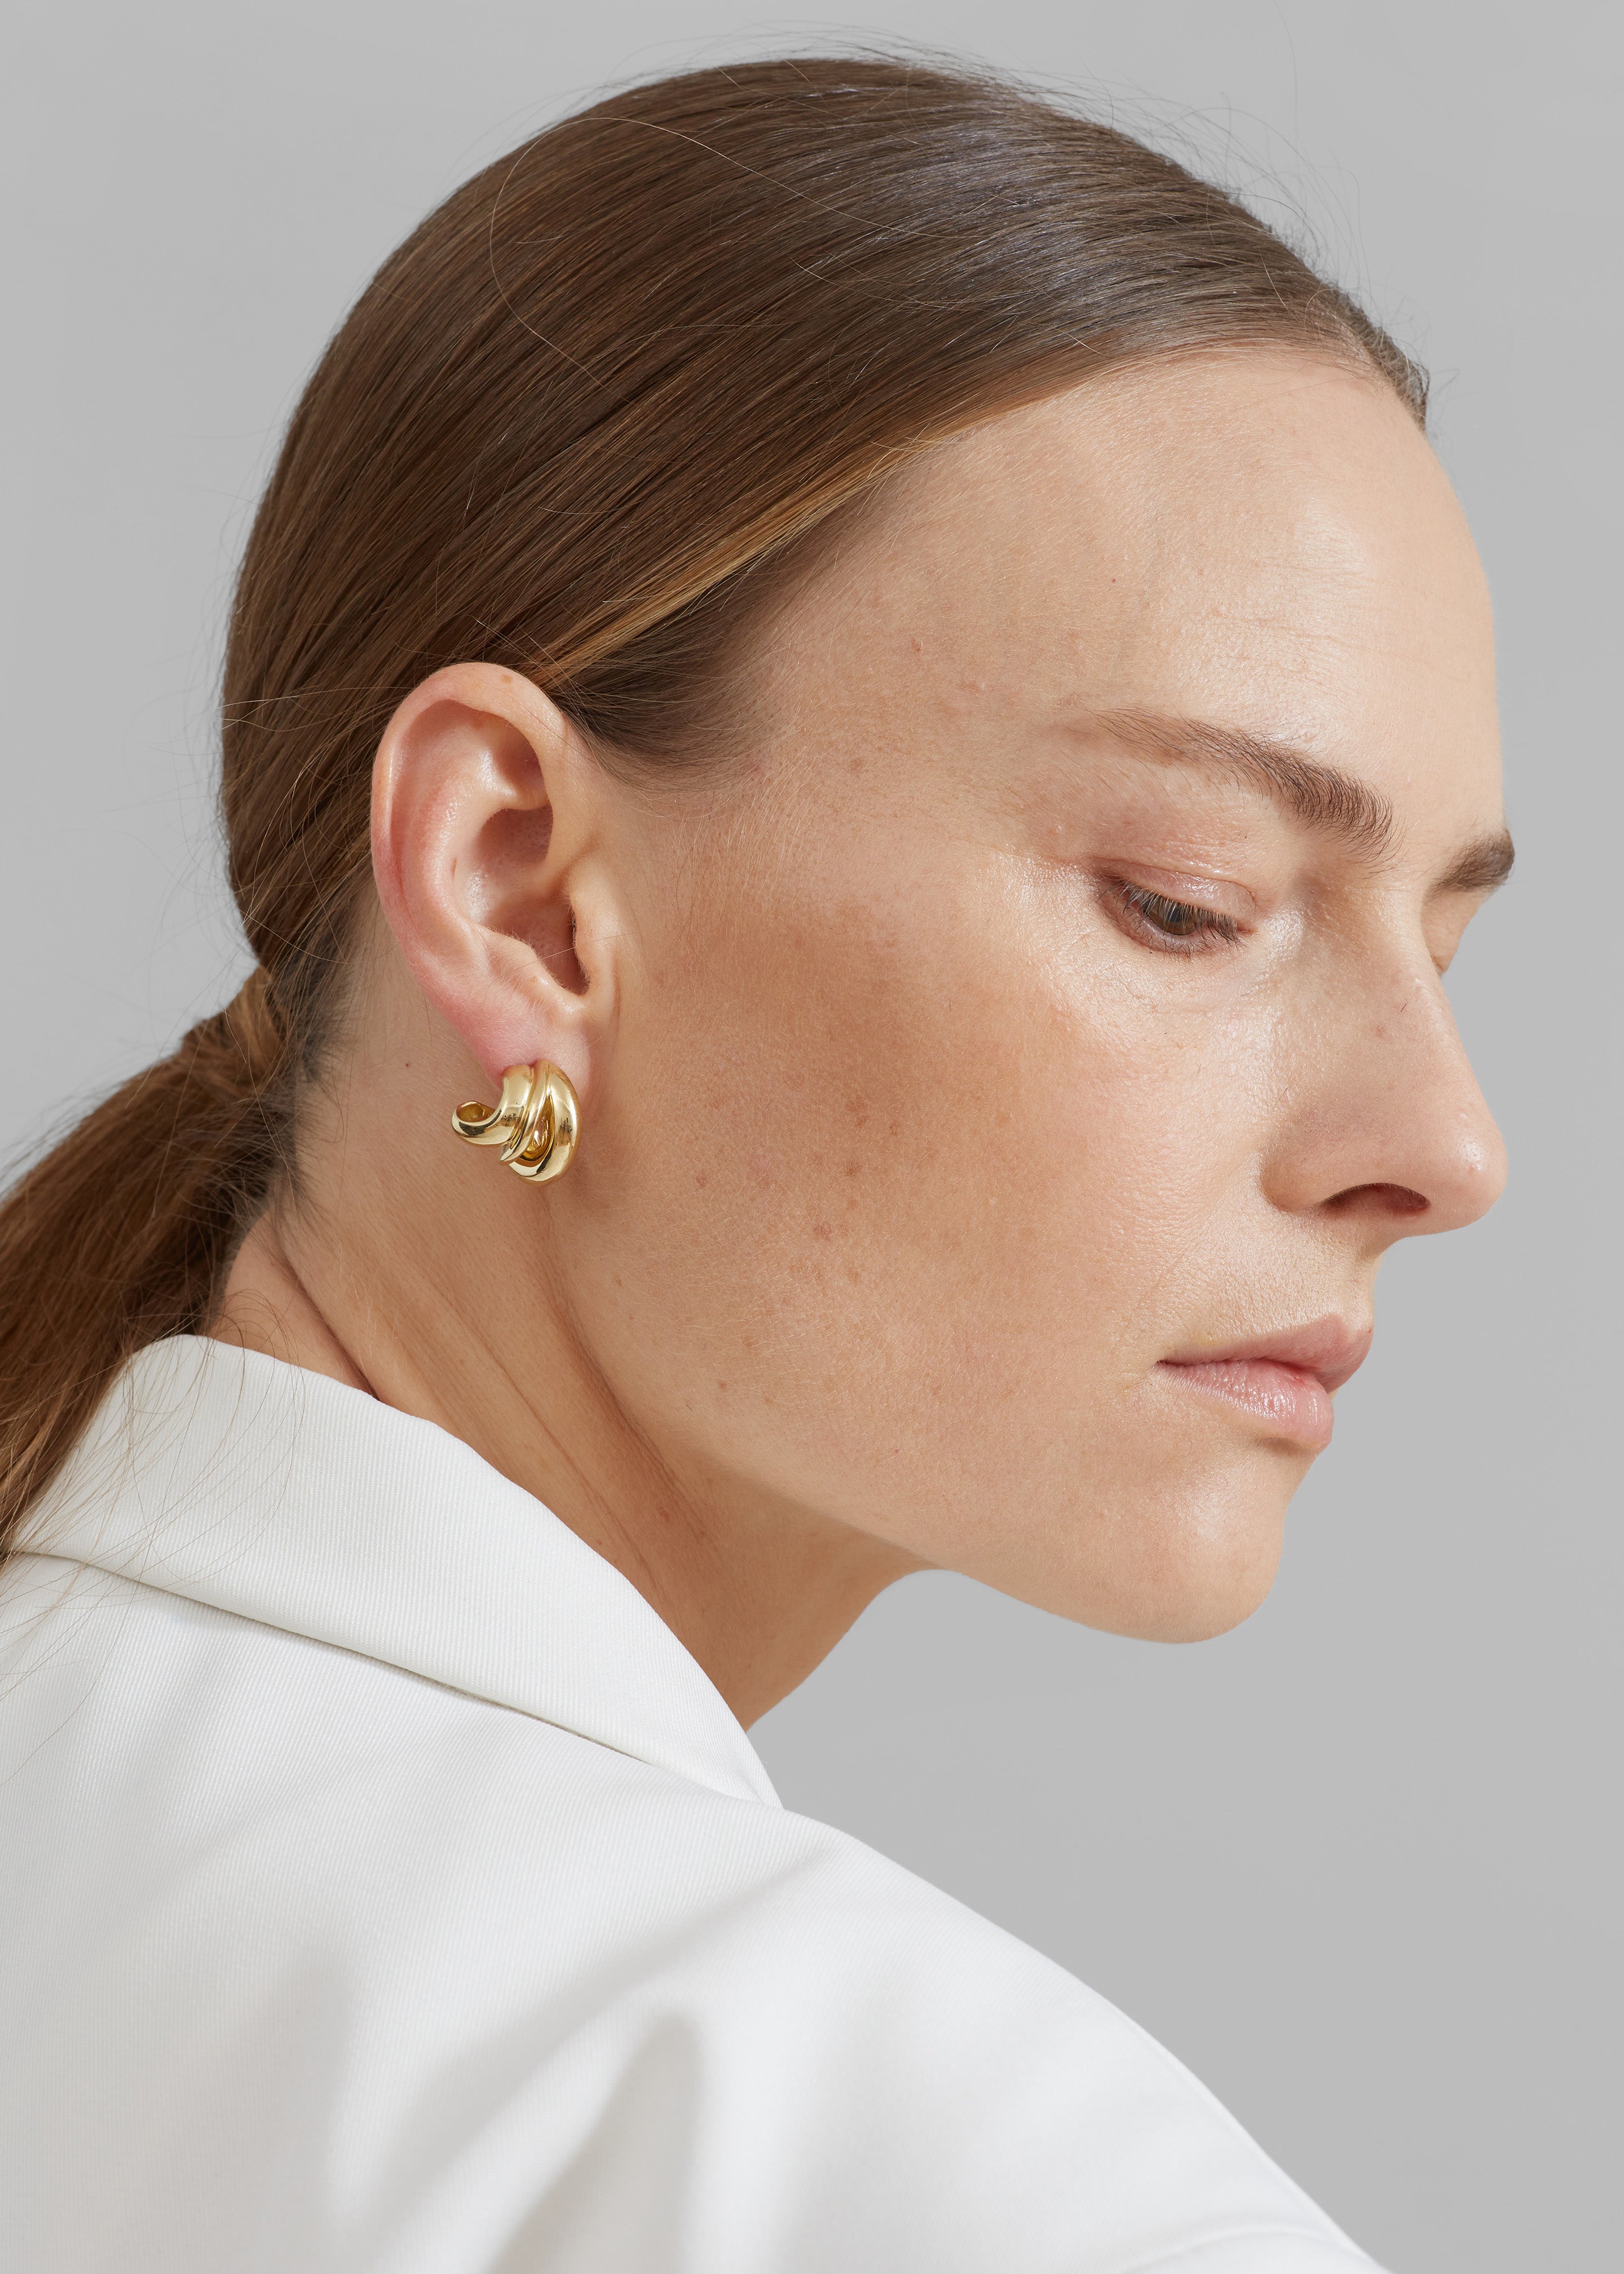 Completedworks The Comeback Kid Earrings - Gold - 3